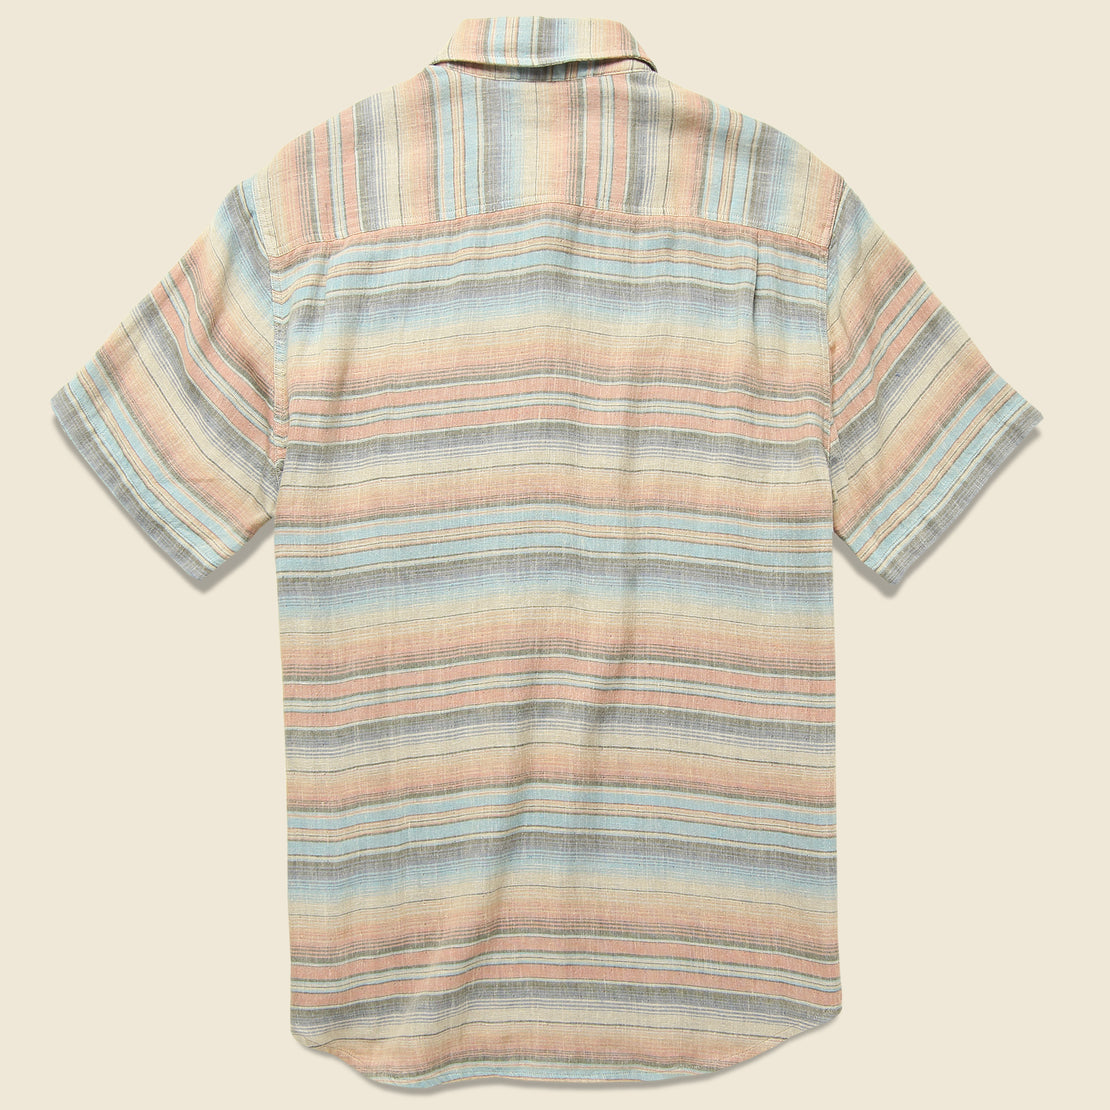 Doublecloth Coast Shirt - Evening Playa - Faherty - STAG Provisions - Tops - S/S Woven - Stripe